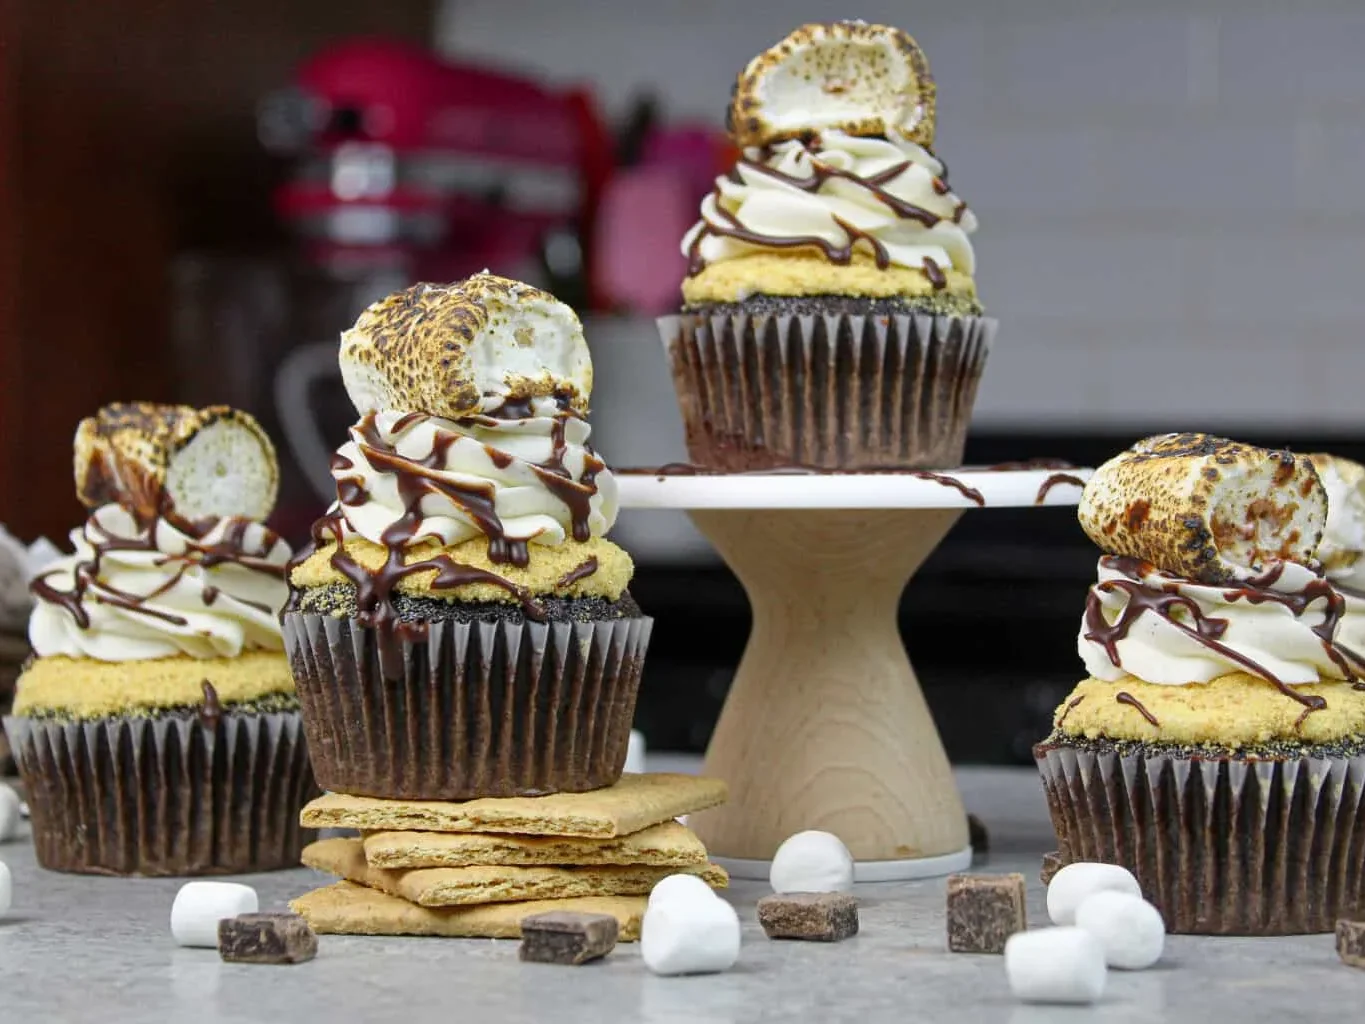 image of s'mores cupcakes made with chocolate cupcakes and marshmallow buttercream